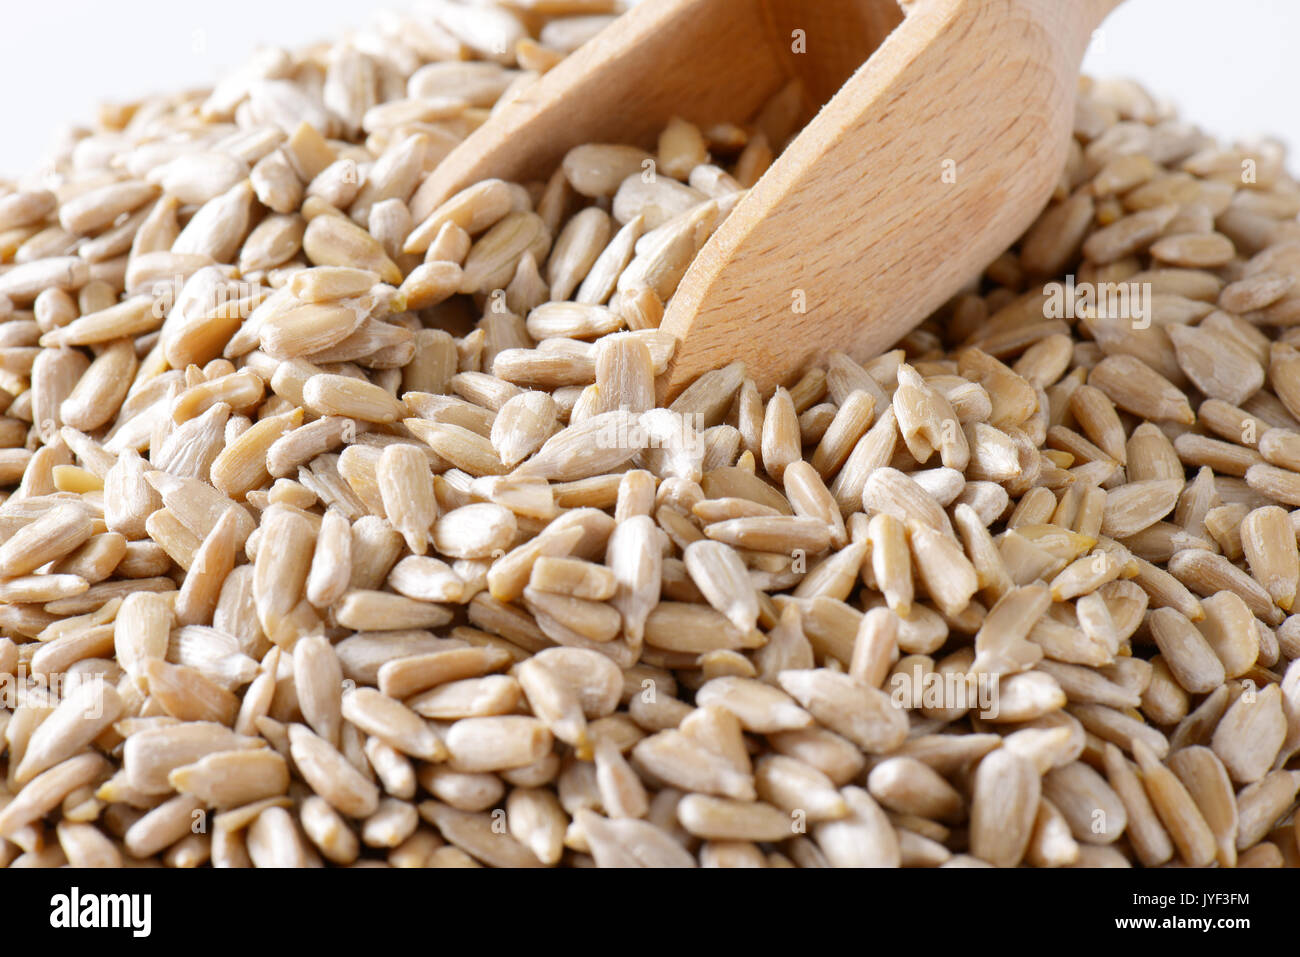 Heap of raw sunflower seeds and scoop Stock Photo